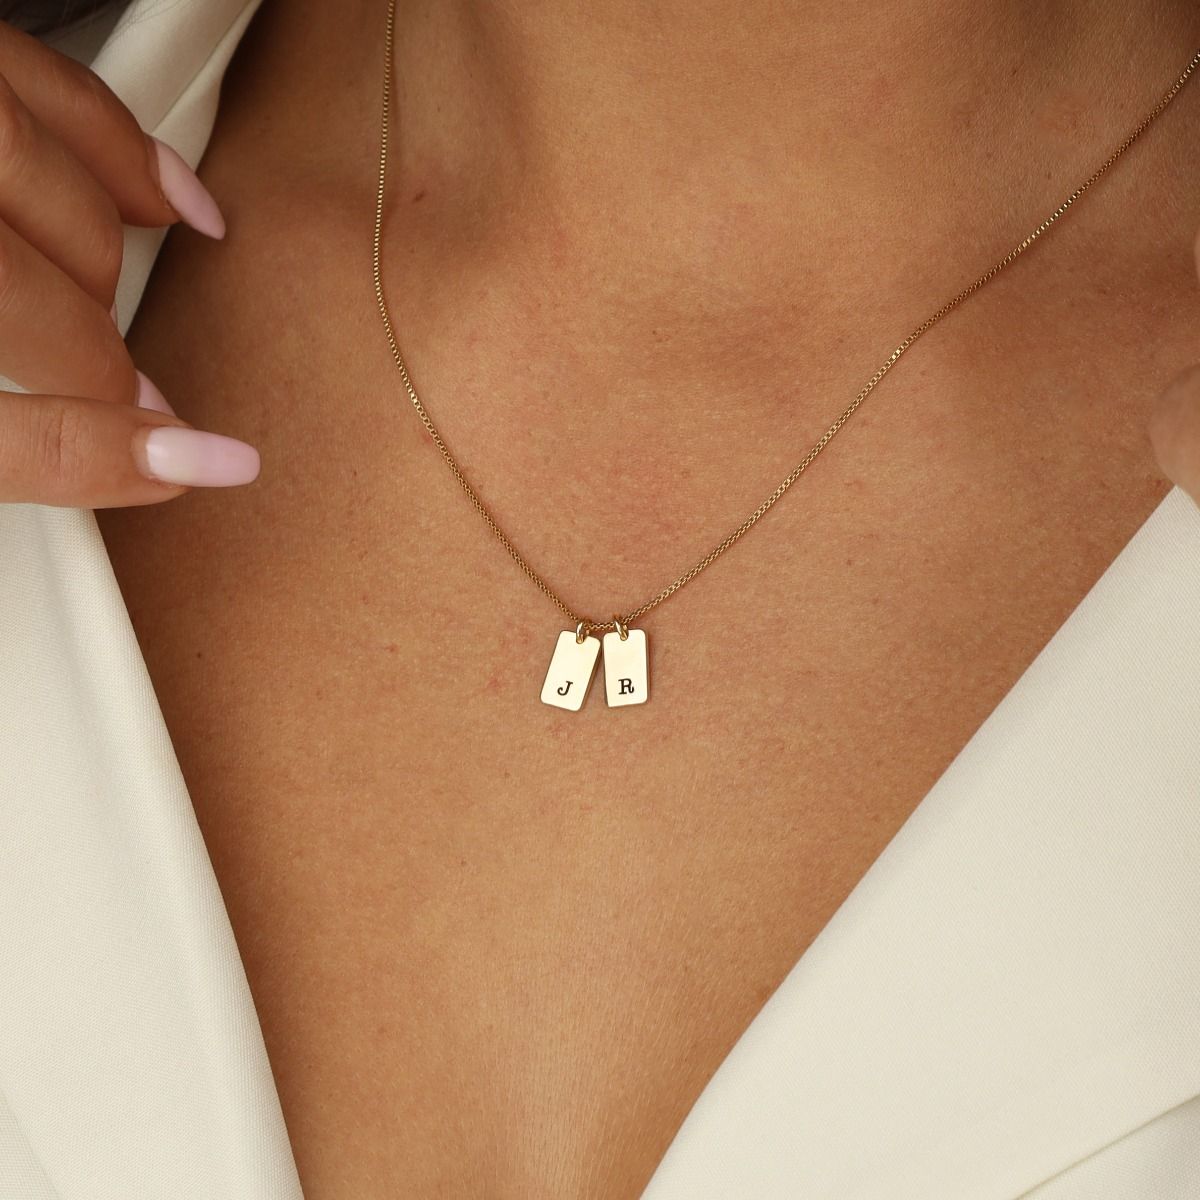 Mirella initials Charm Necklace in Silver - Best Gift for Her - Talisa